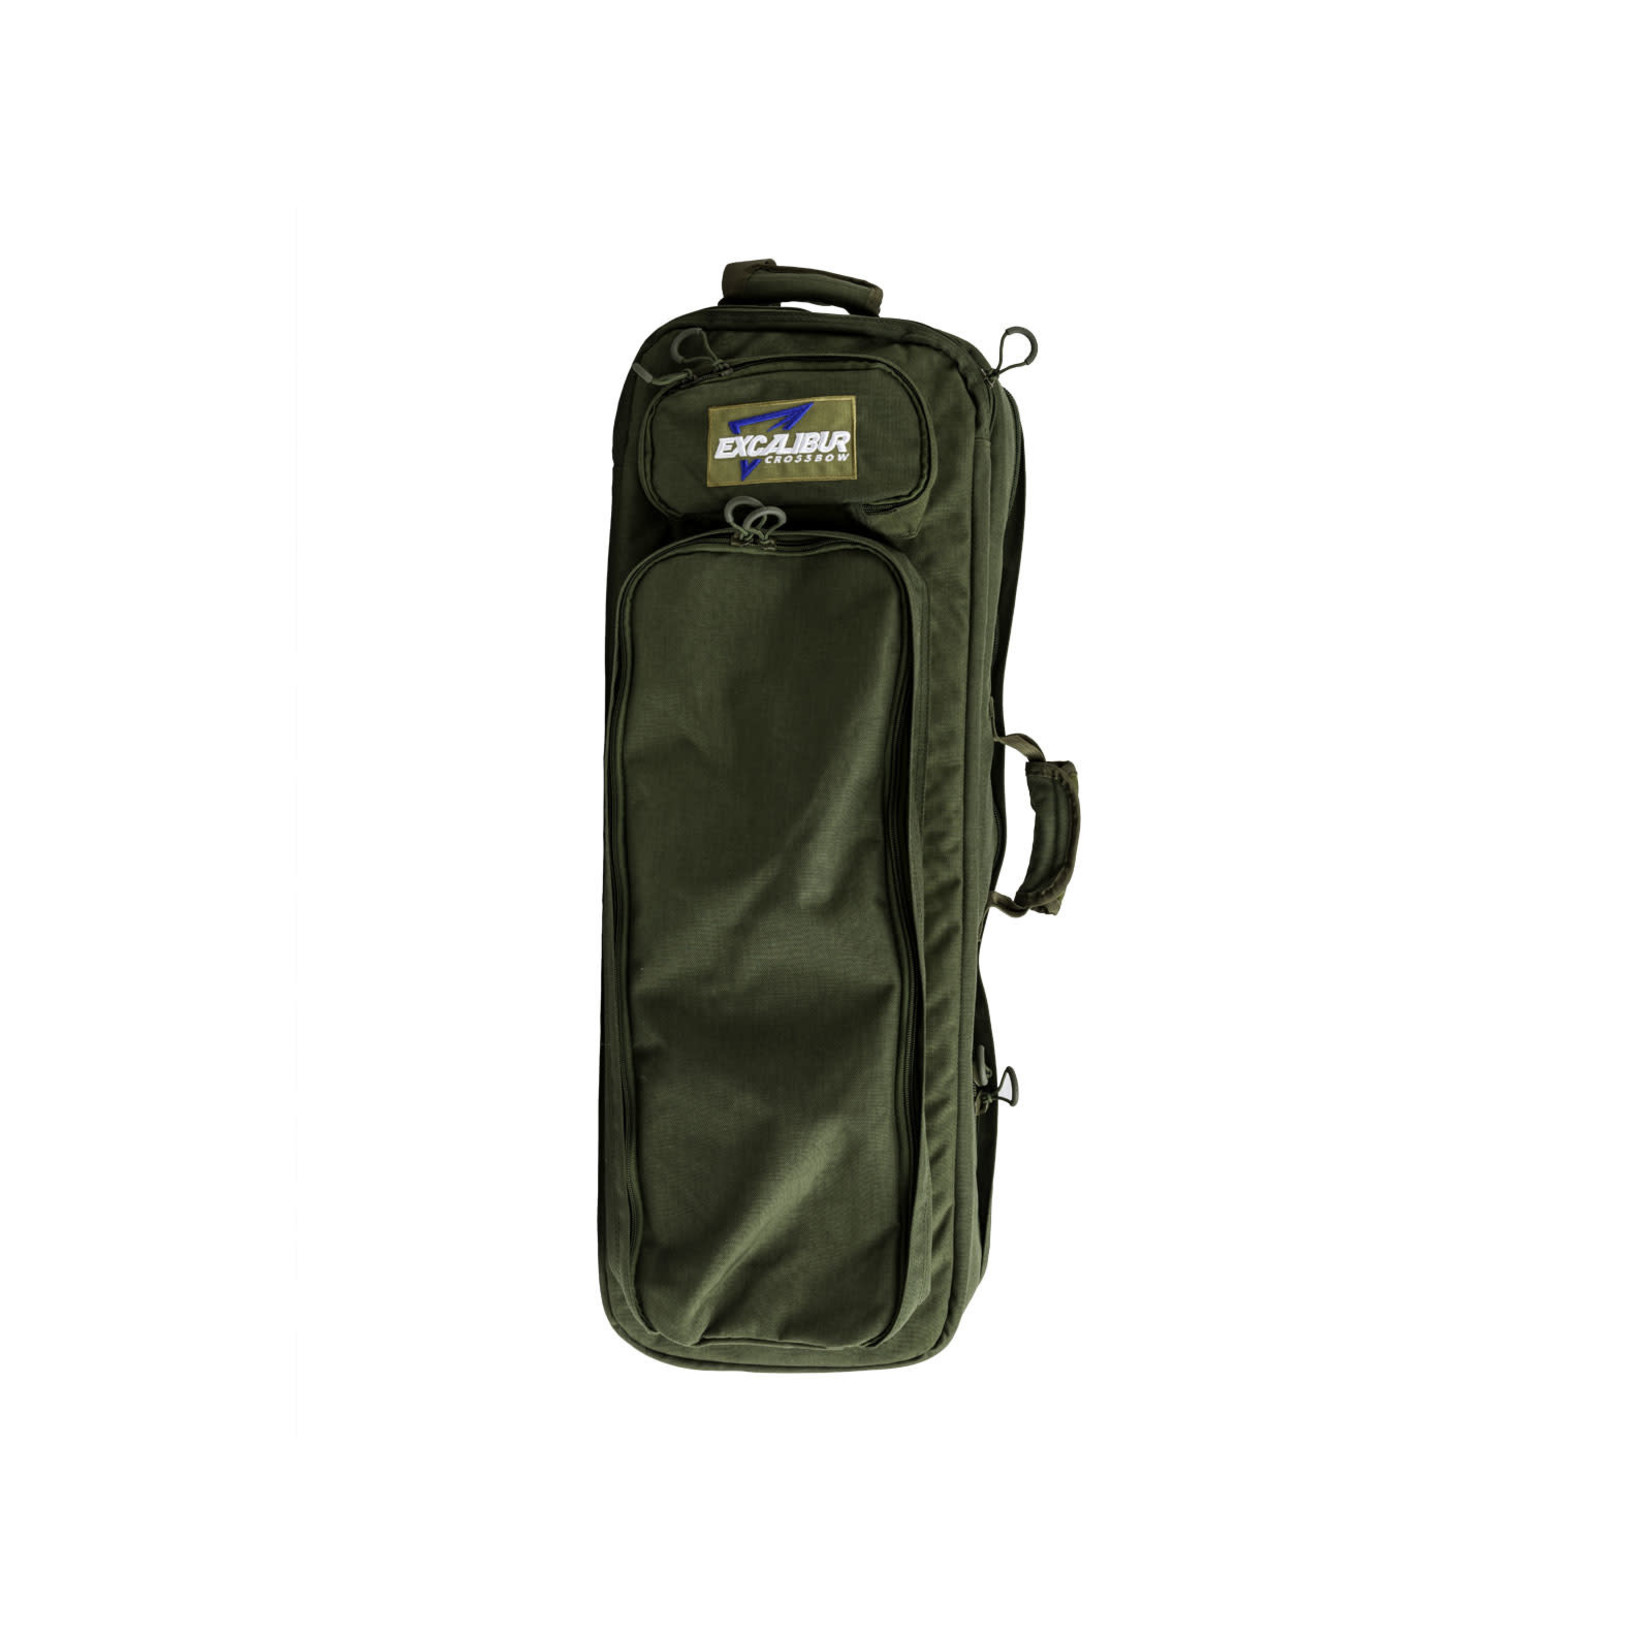 Excalibur Explore Case - Take-Down Crossbow Case. Fits Micro, Matrix And Assassin Series